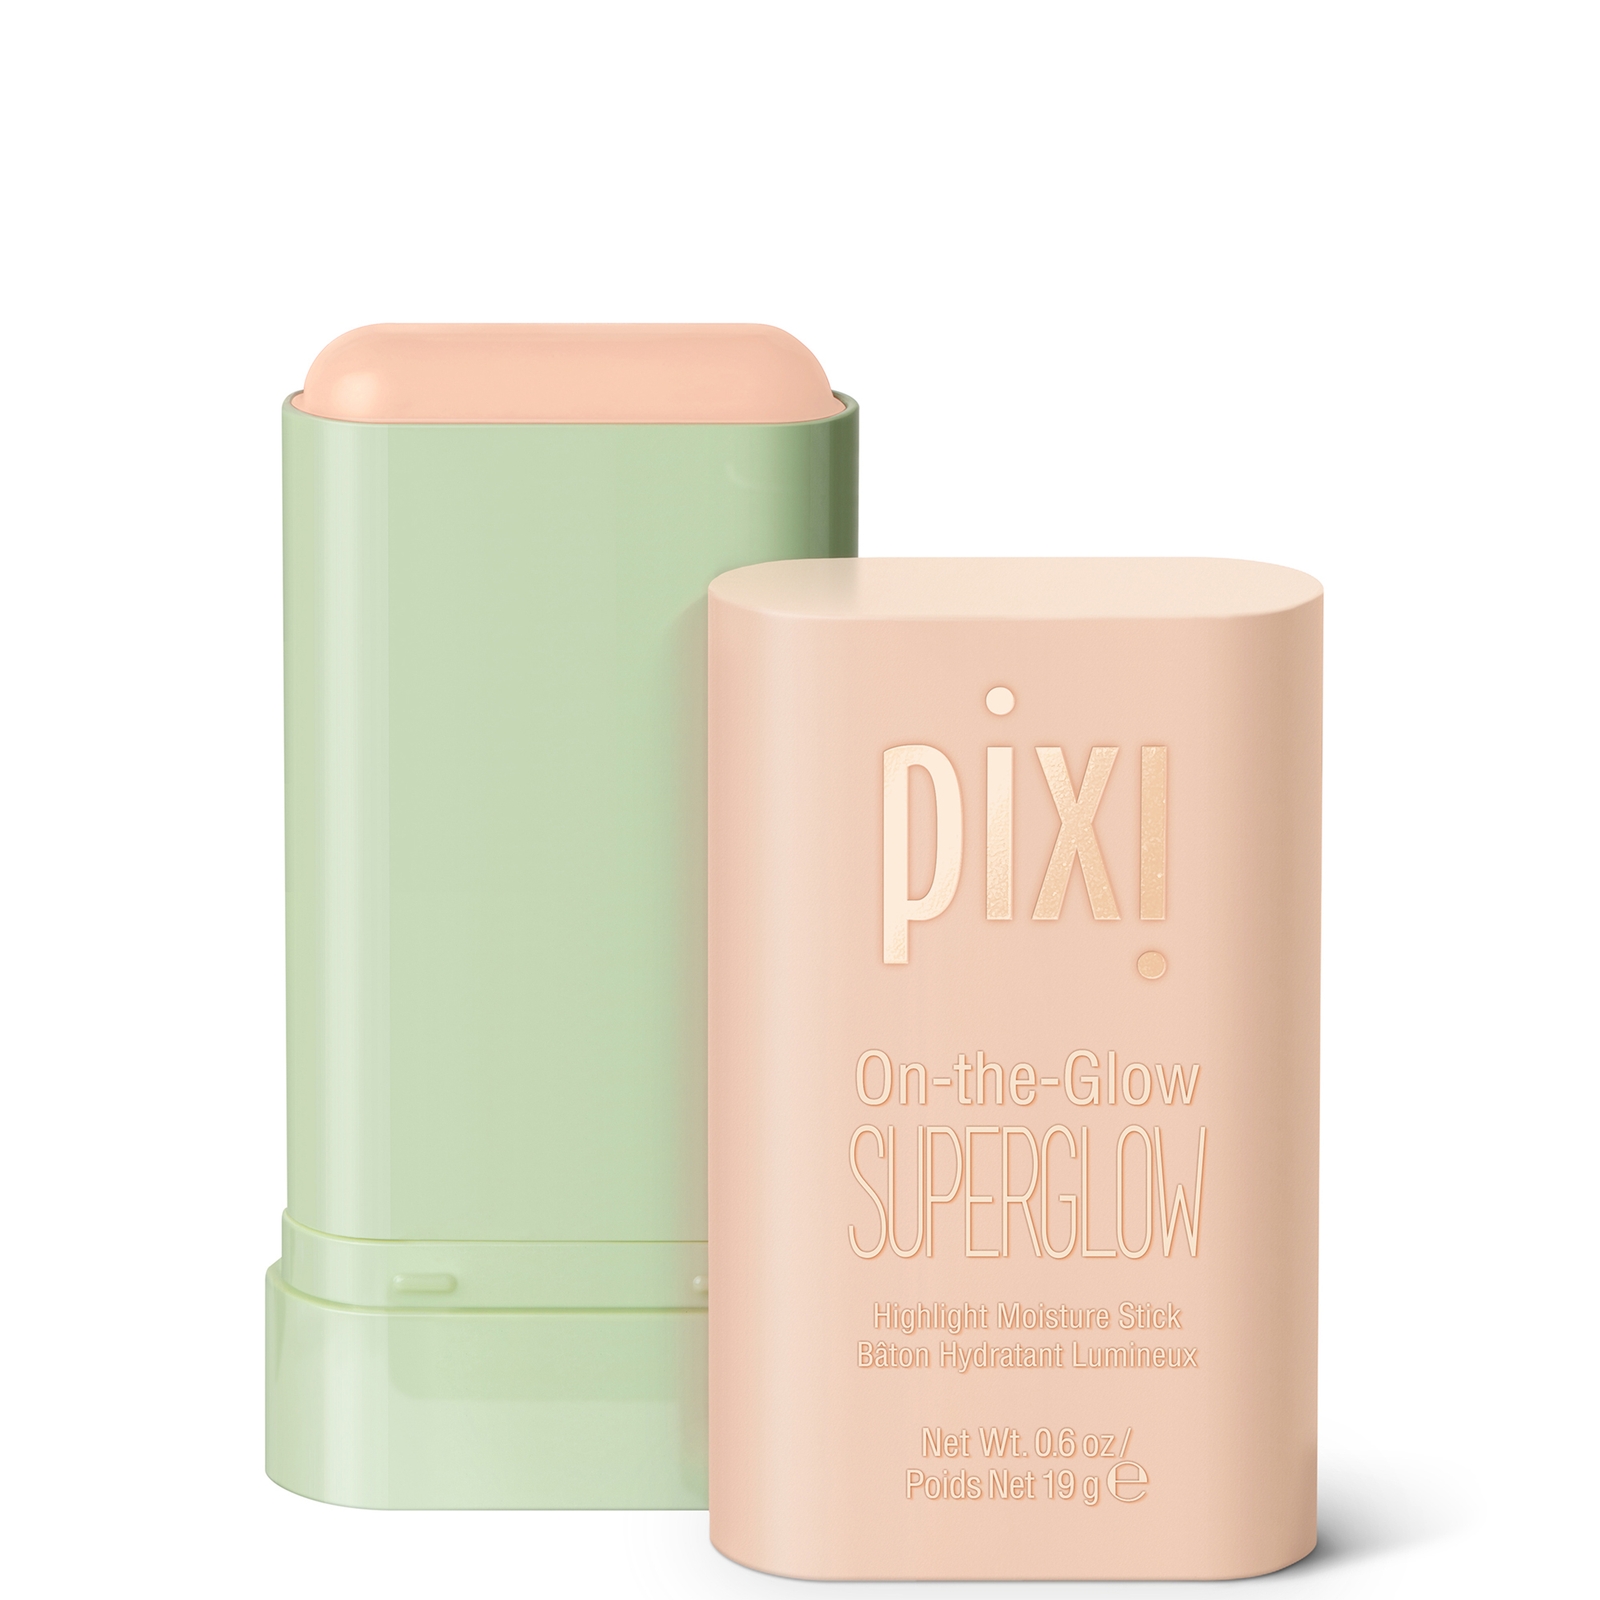 PIXI On-the-Glow SUPERGLOW Highlighter 19g (Various Shades) - NaturaLustre